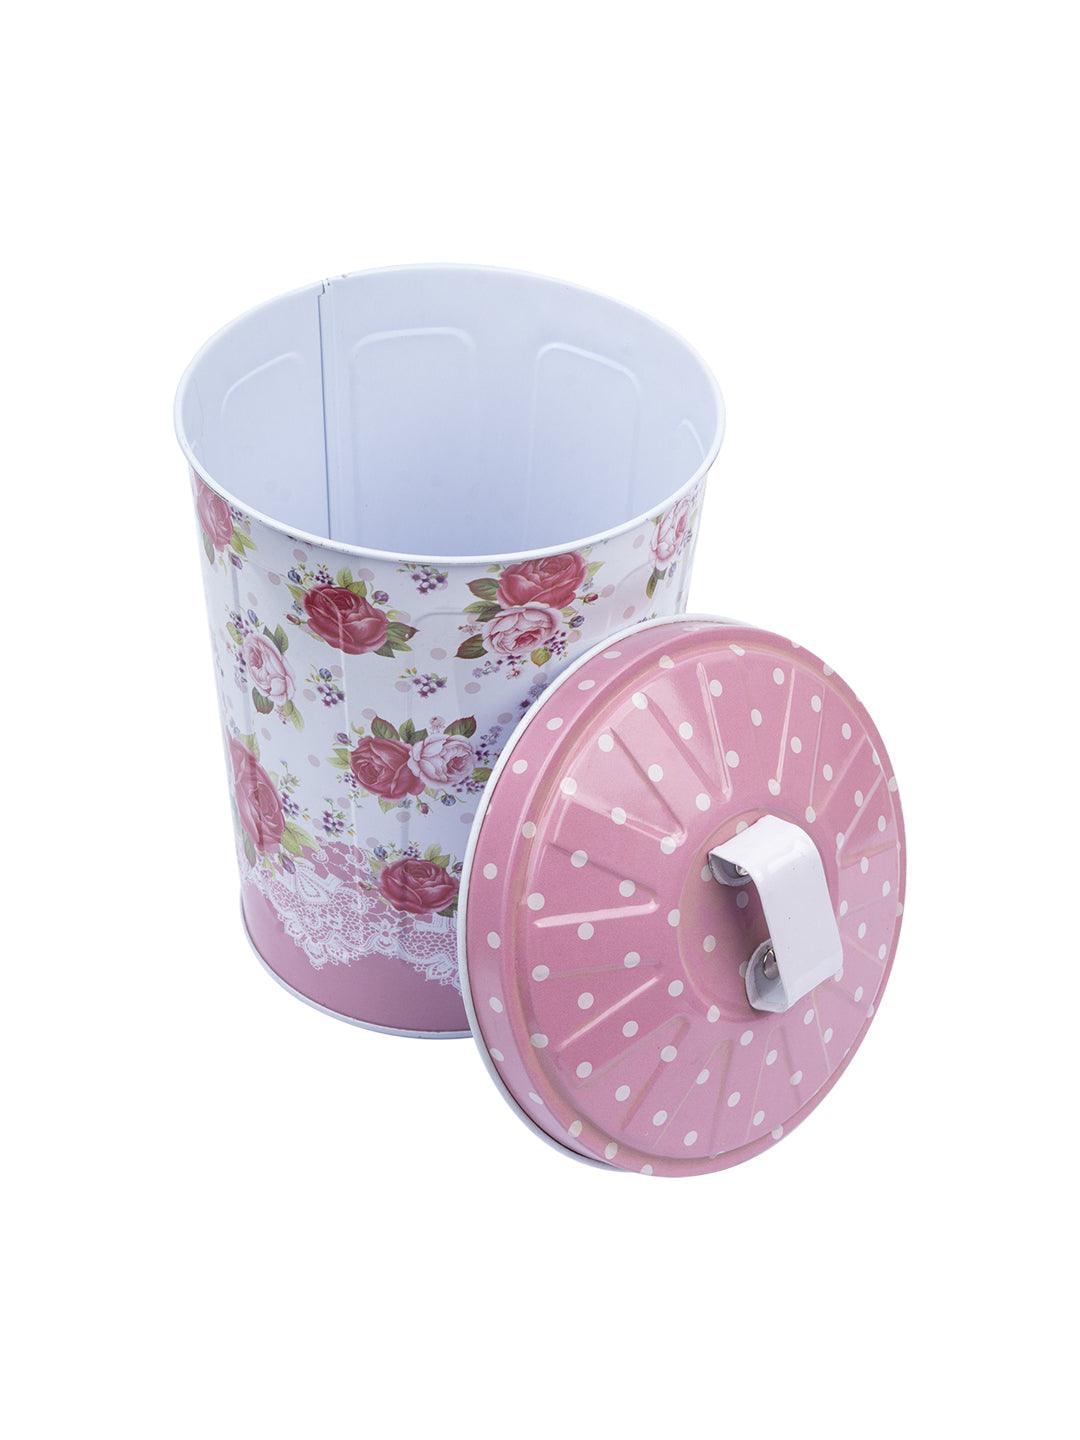 Floral Design Cylindrical Canister With Lid - Pink - MARKET 99